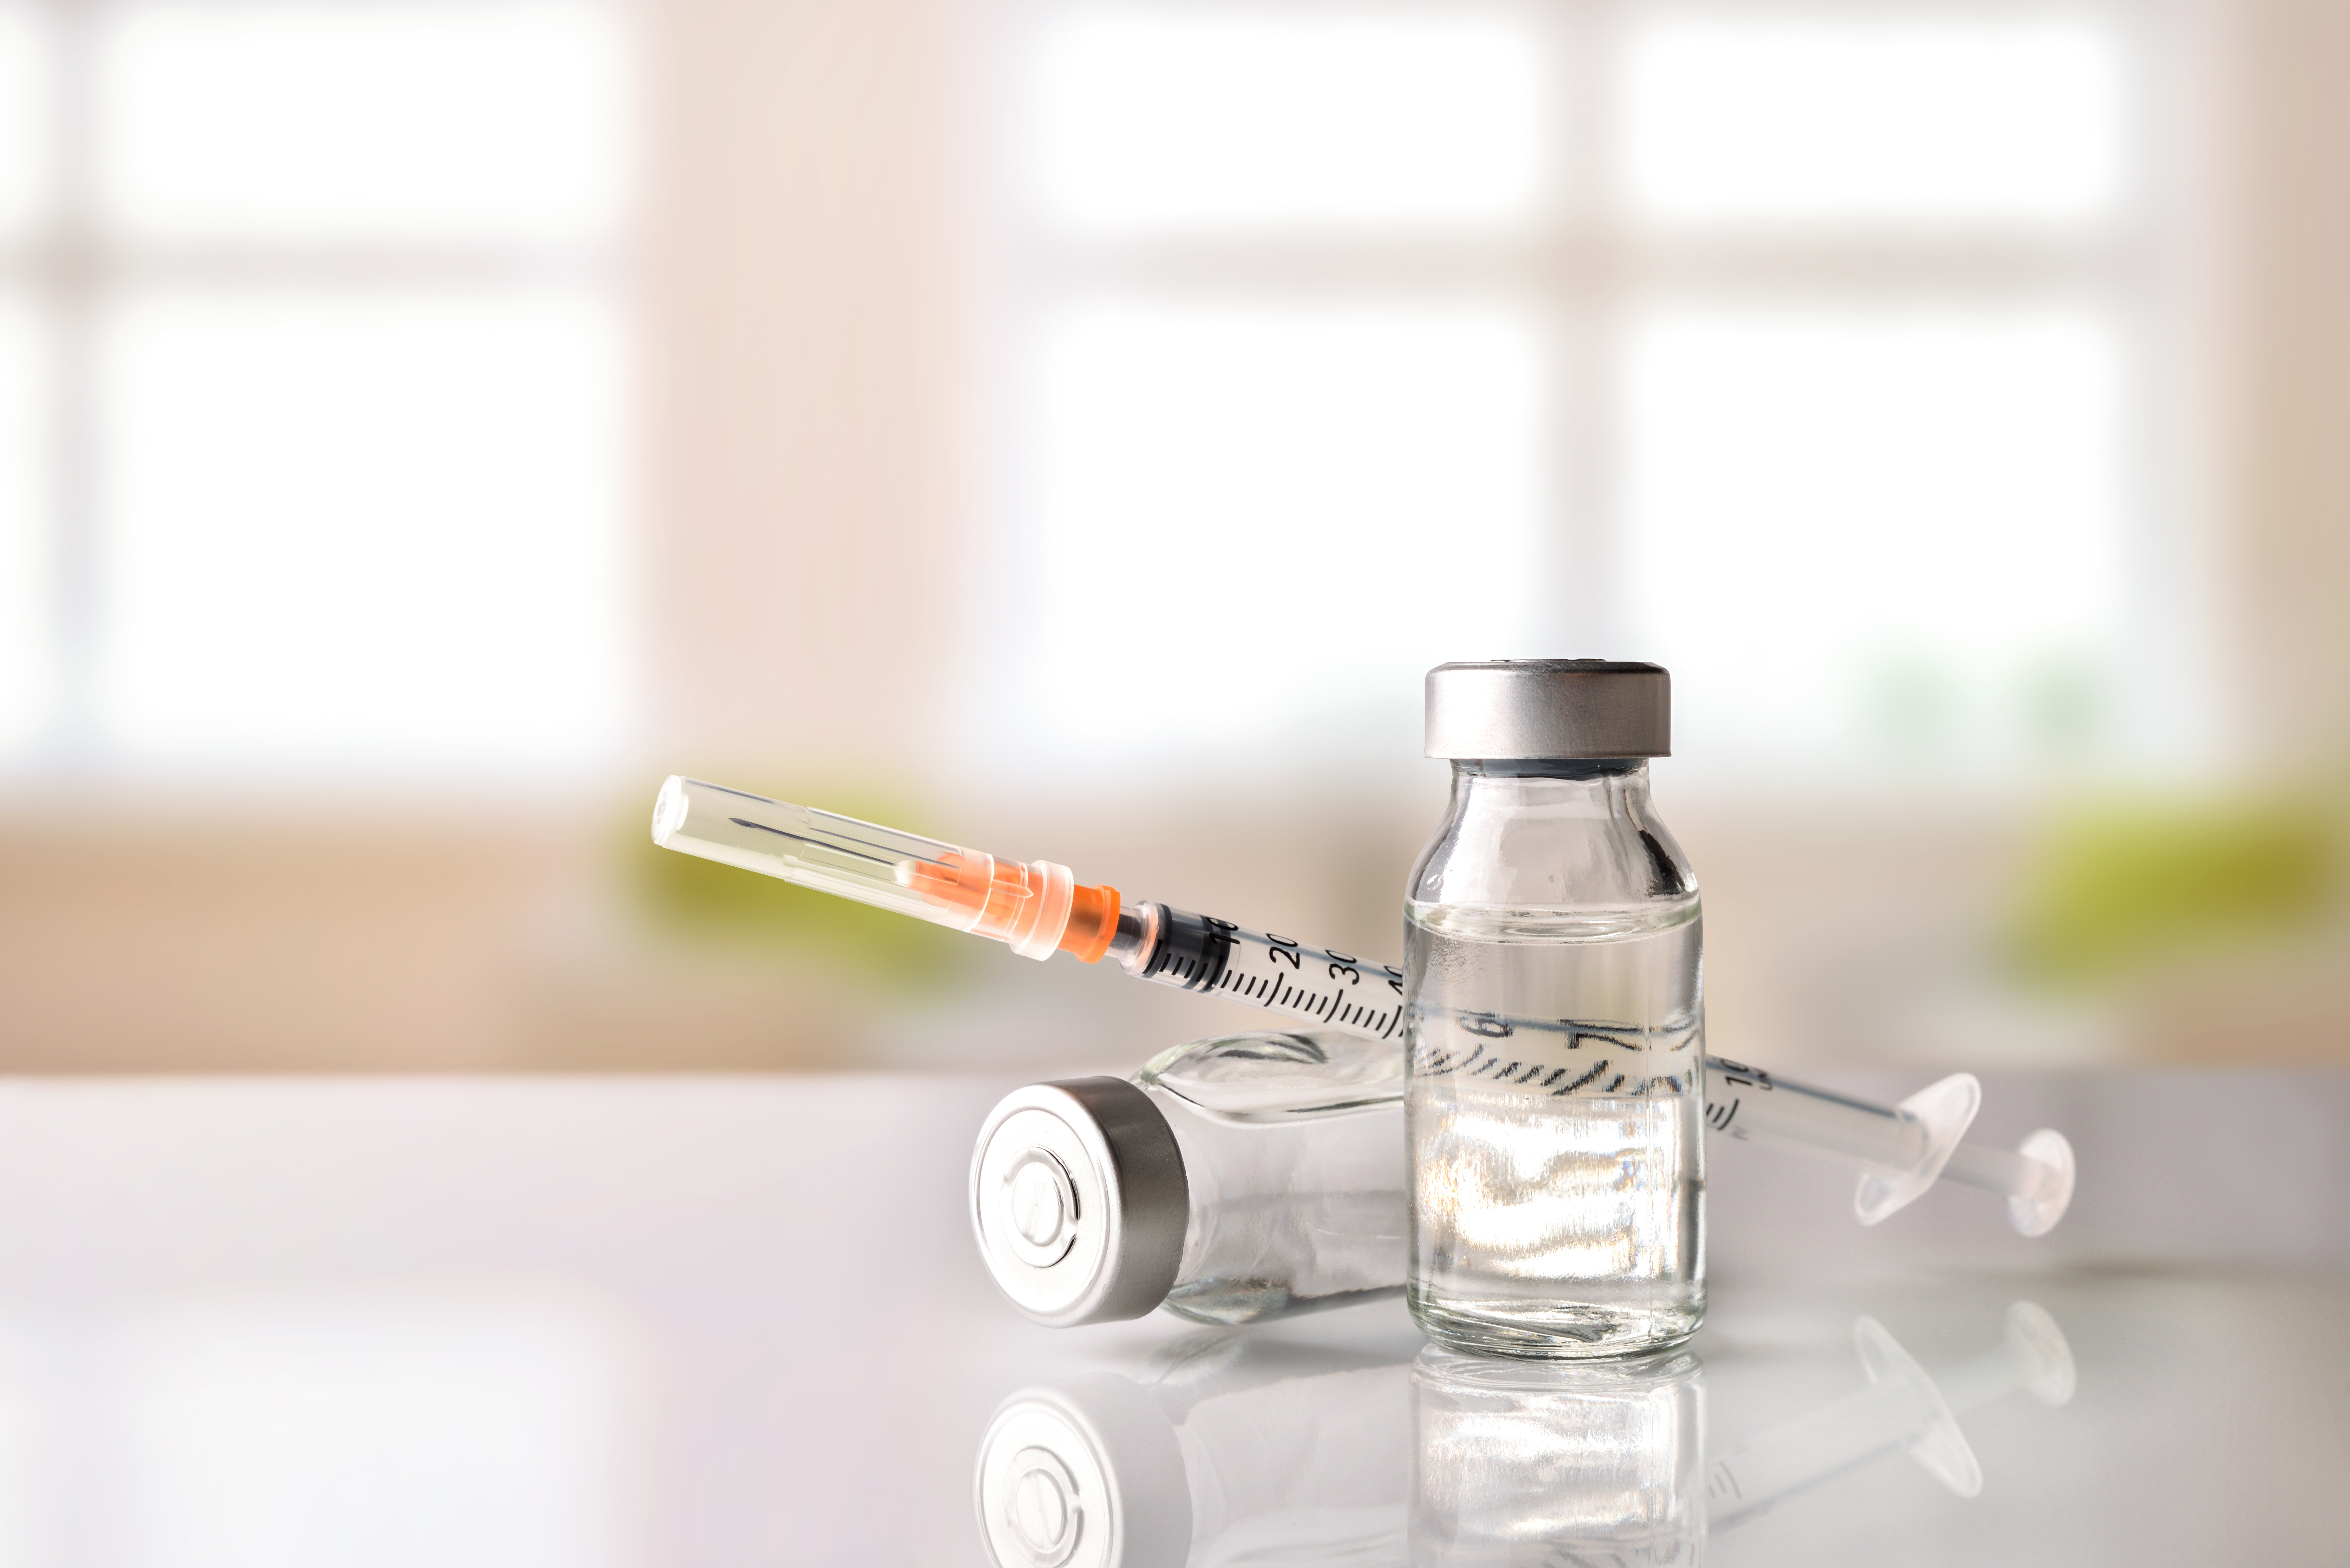 Picture of needle and liquid in two bottles